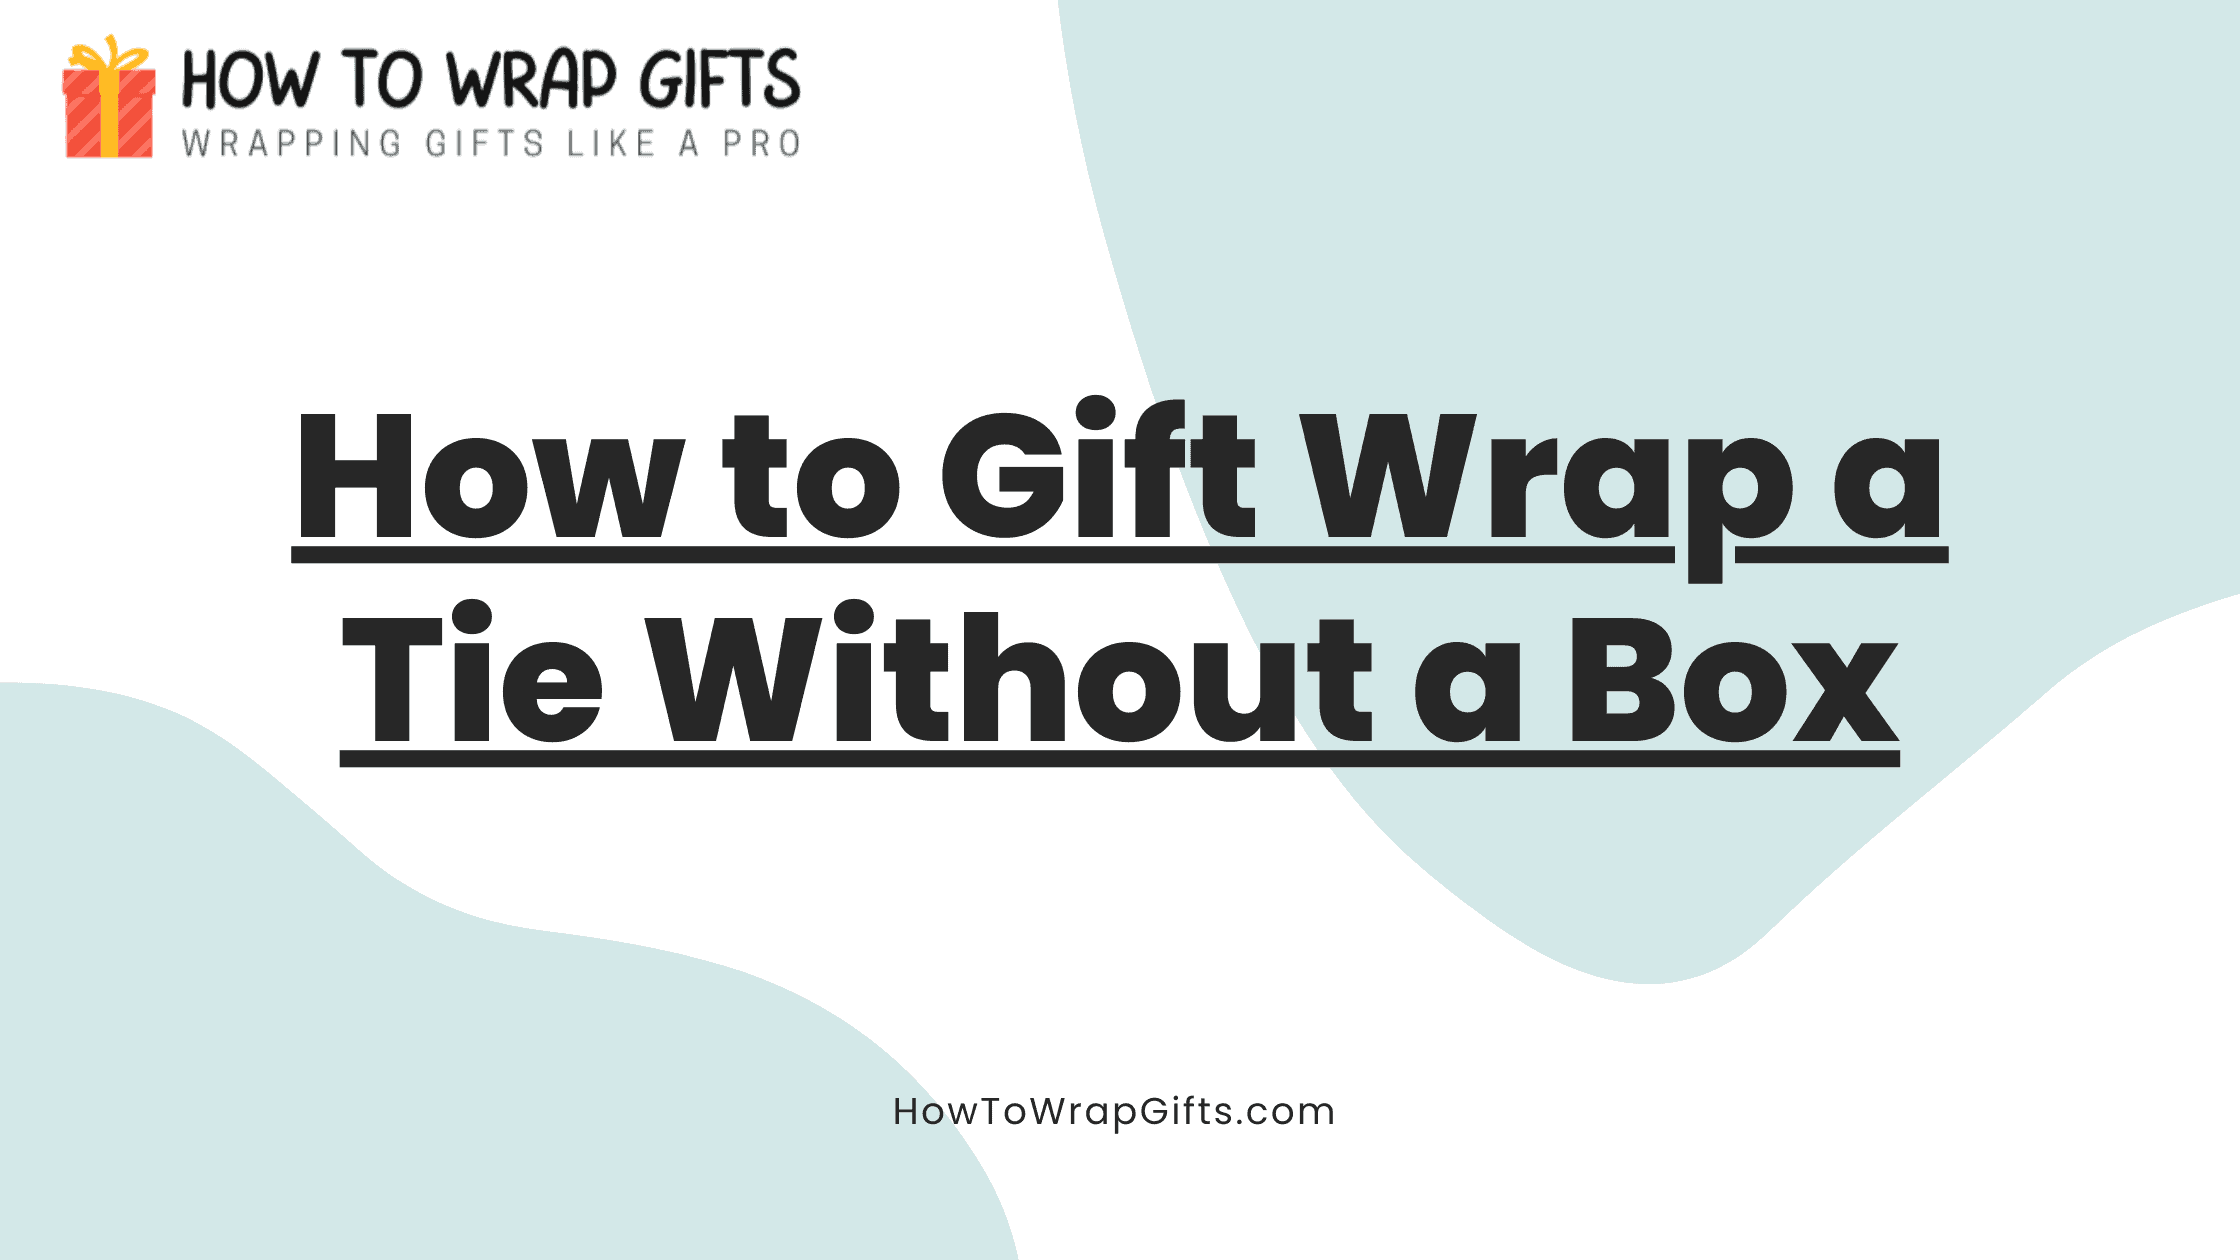 How to Gift Wrap a Tie Without a Box